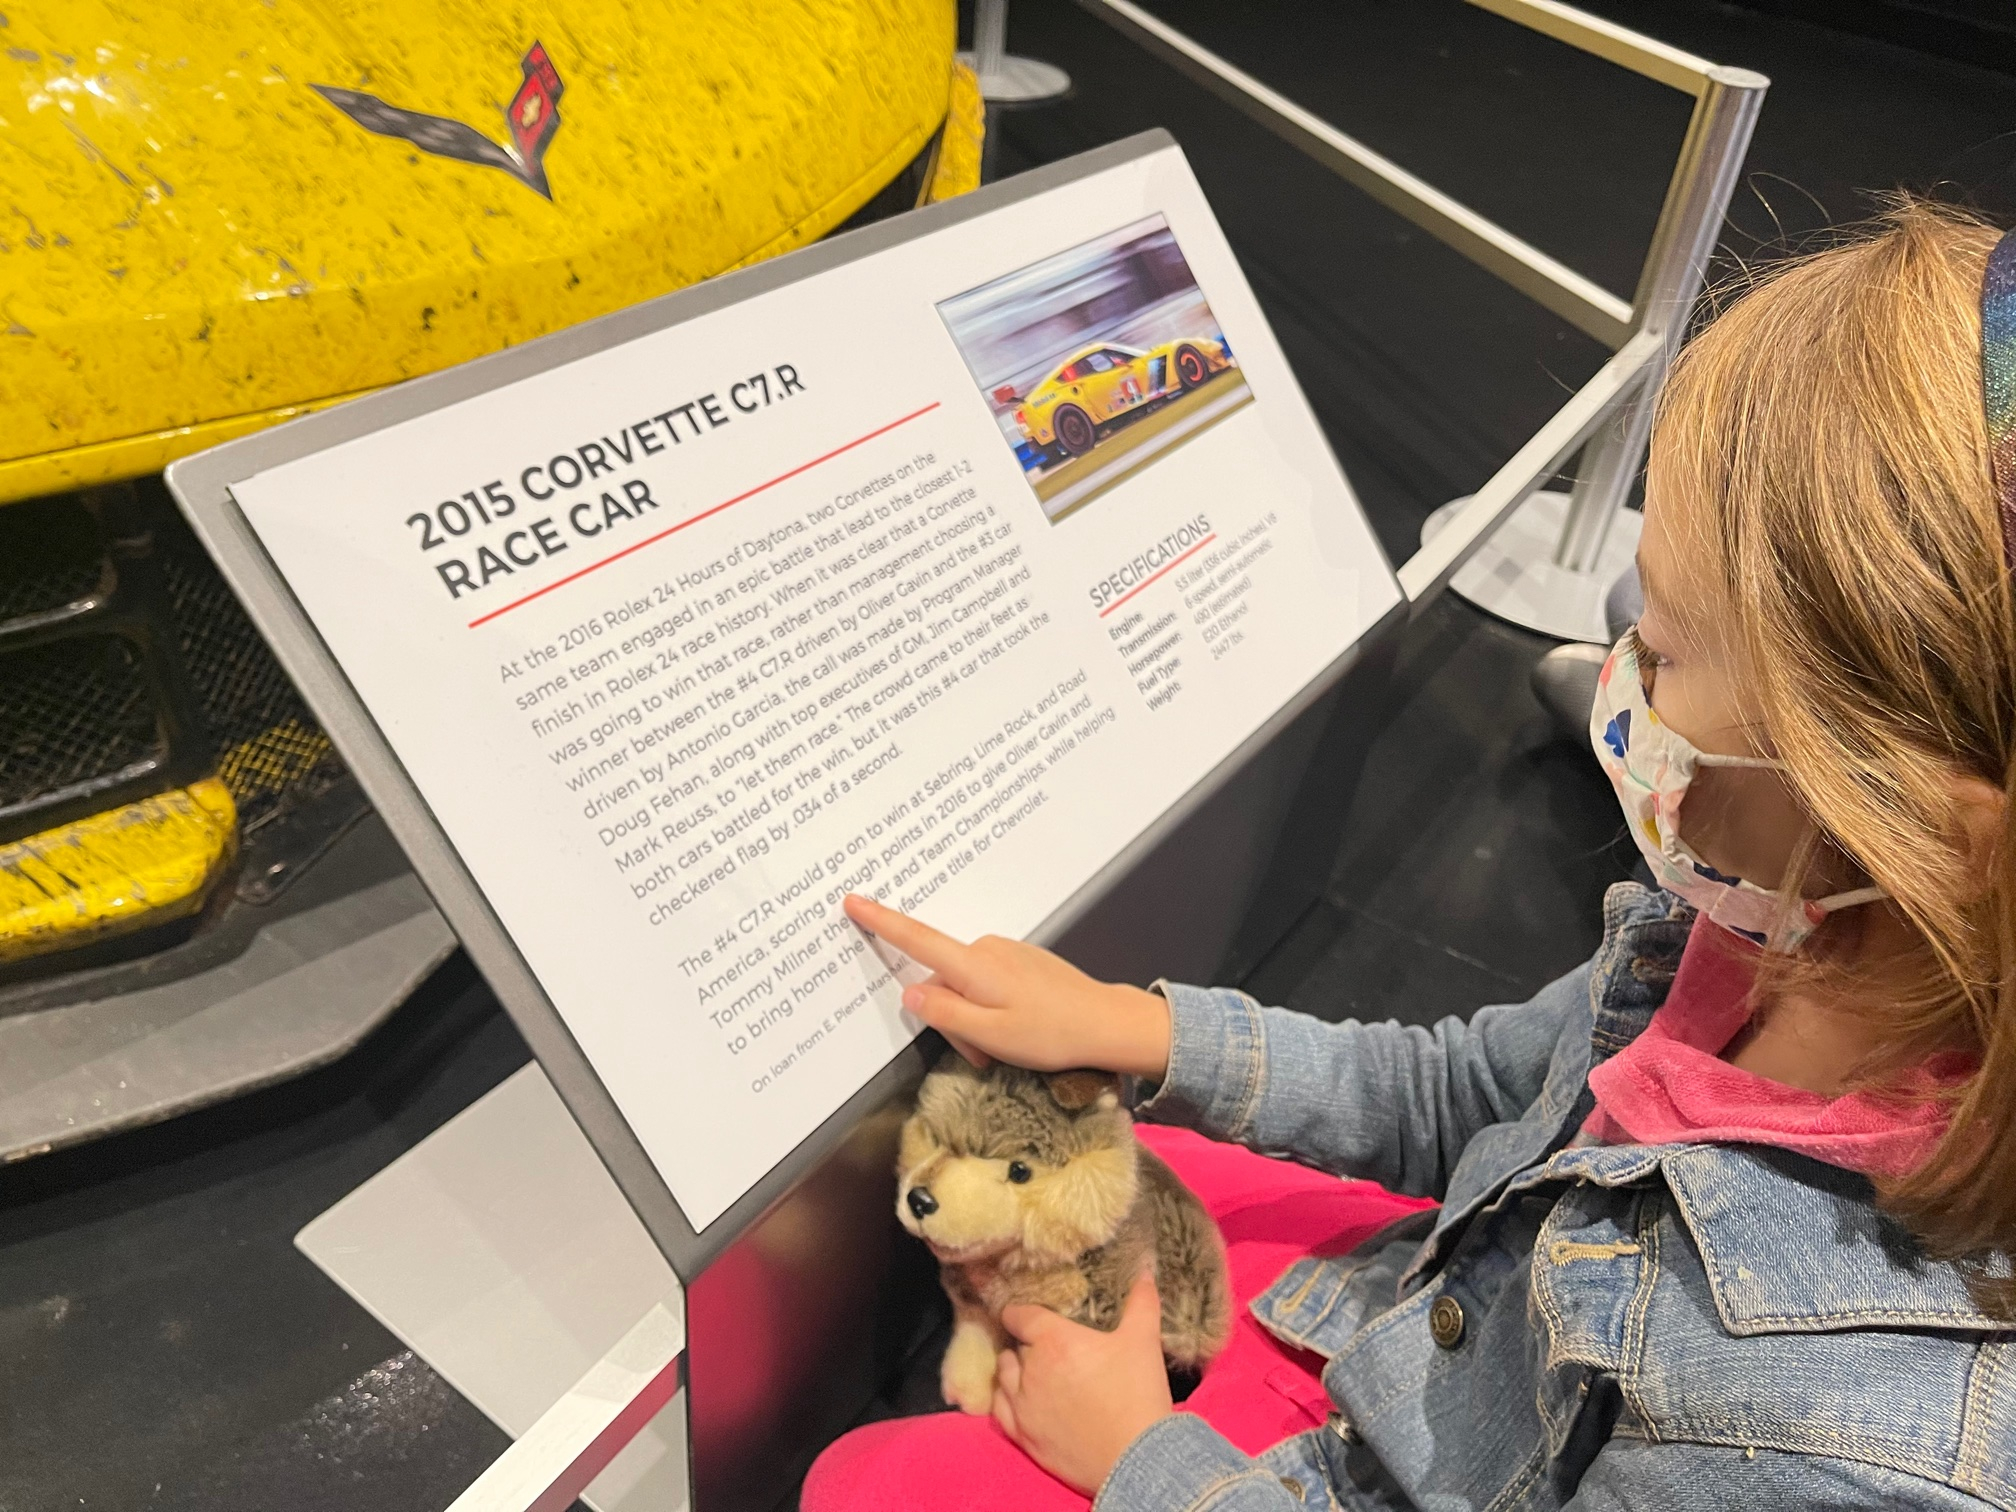 Best things to do in Bowling Green with kids. National Corvette Museum - Scarlett reading about 2015 Corvette C7R Race Car